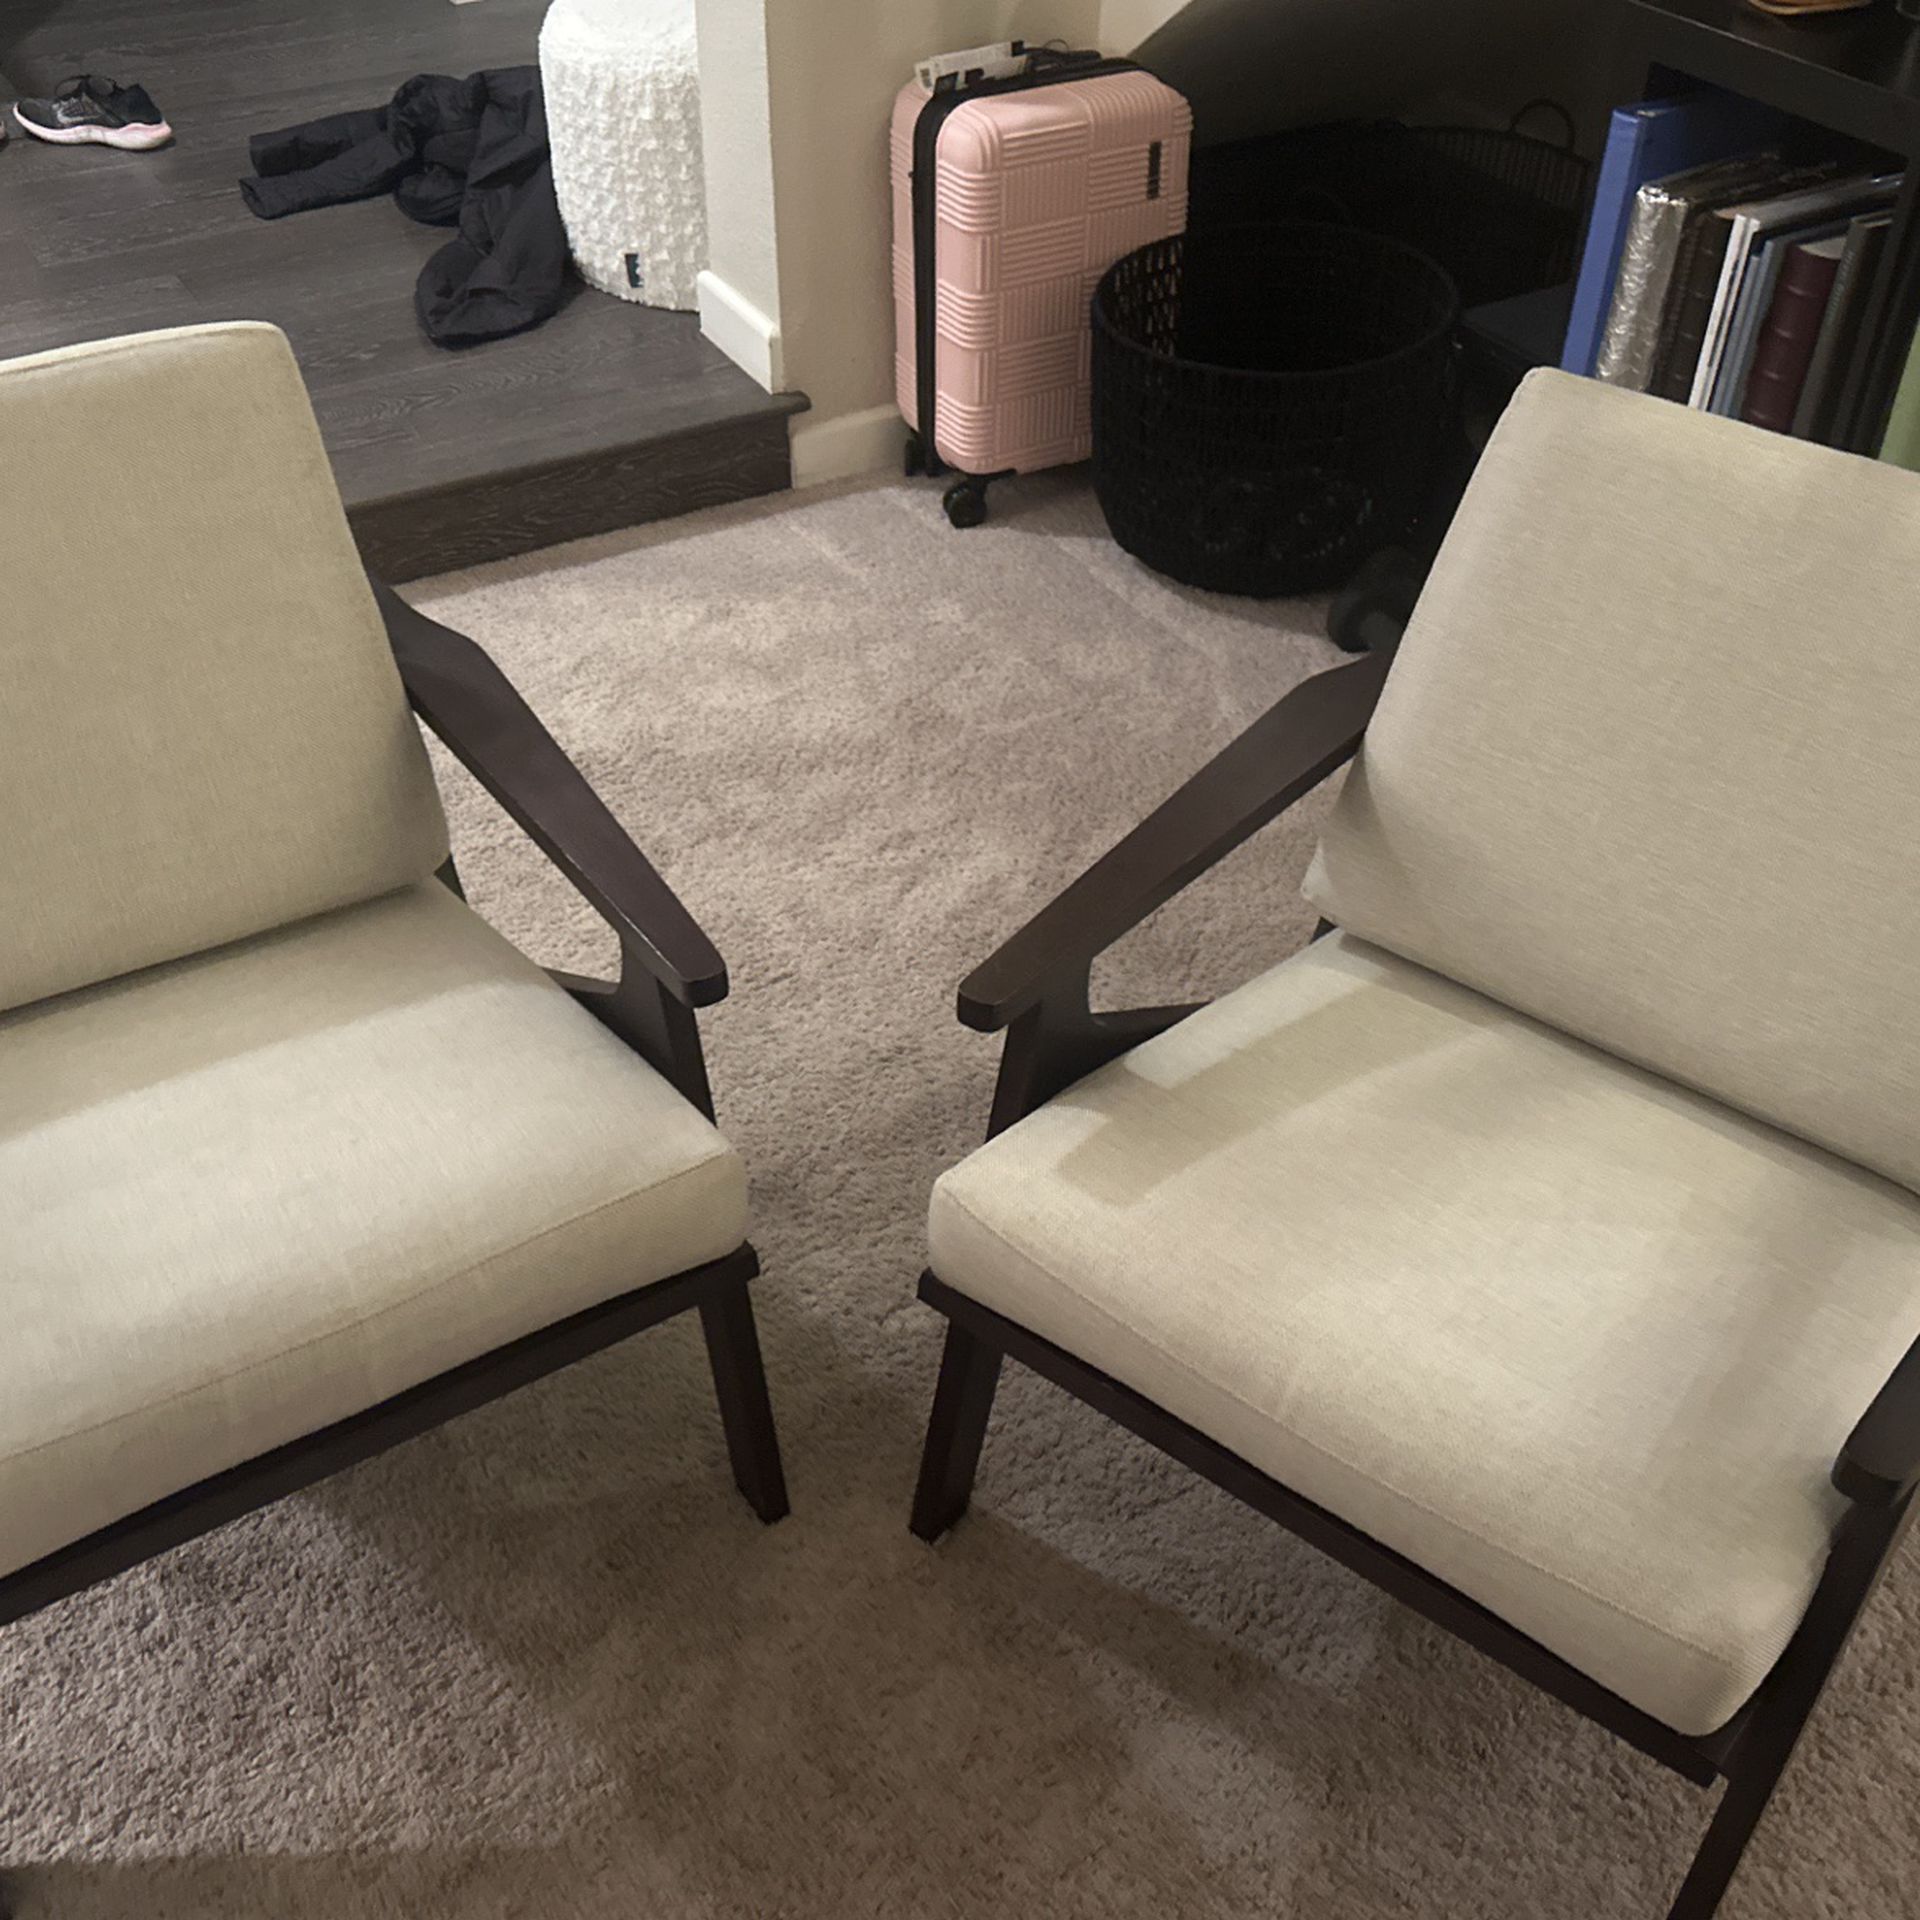 2 Room and Board Lounge Chairs